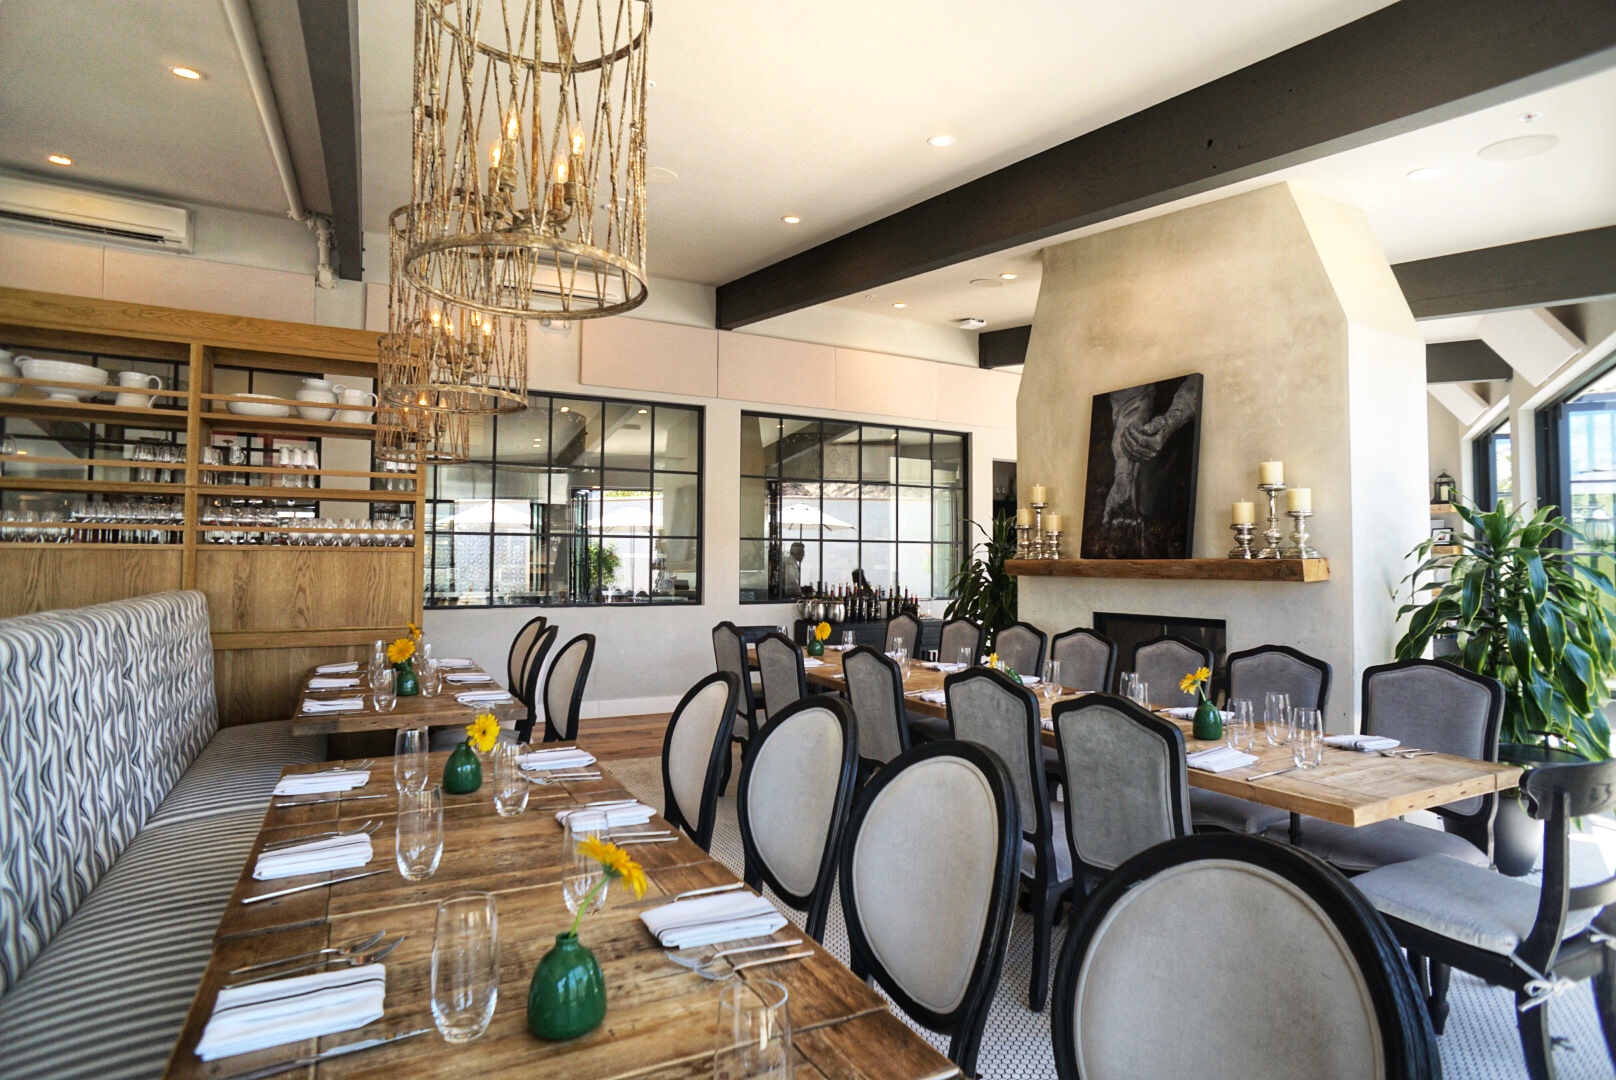 Temecula Restaurant Leoness Cellars Offers Elegant French Cuisine With A California Twist